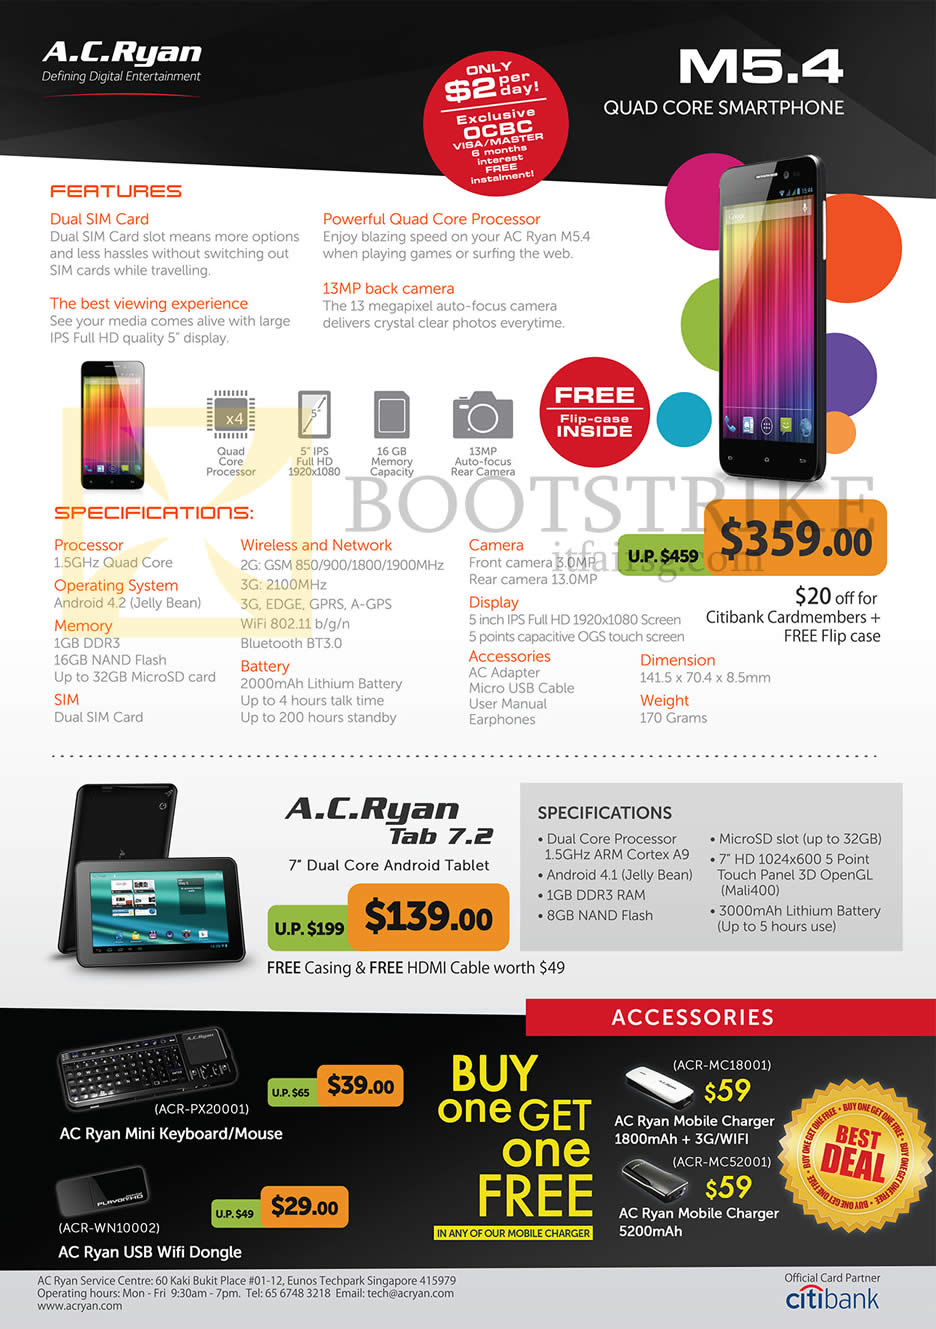 SITEX 2013 price list image brochure of AC Ryan Smartphone M5.4, Tab 7.2 Android Tablet, Accessories, Keyboards, Mouse